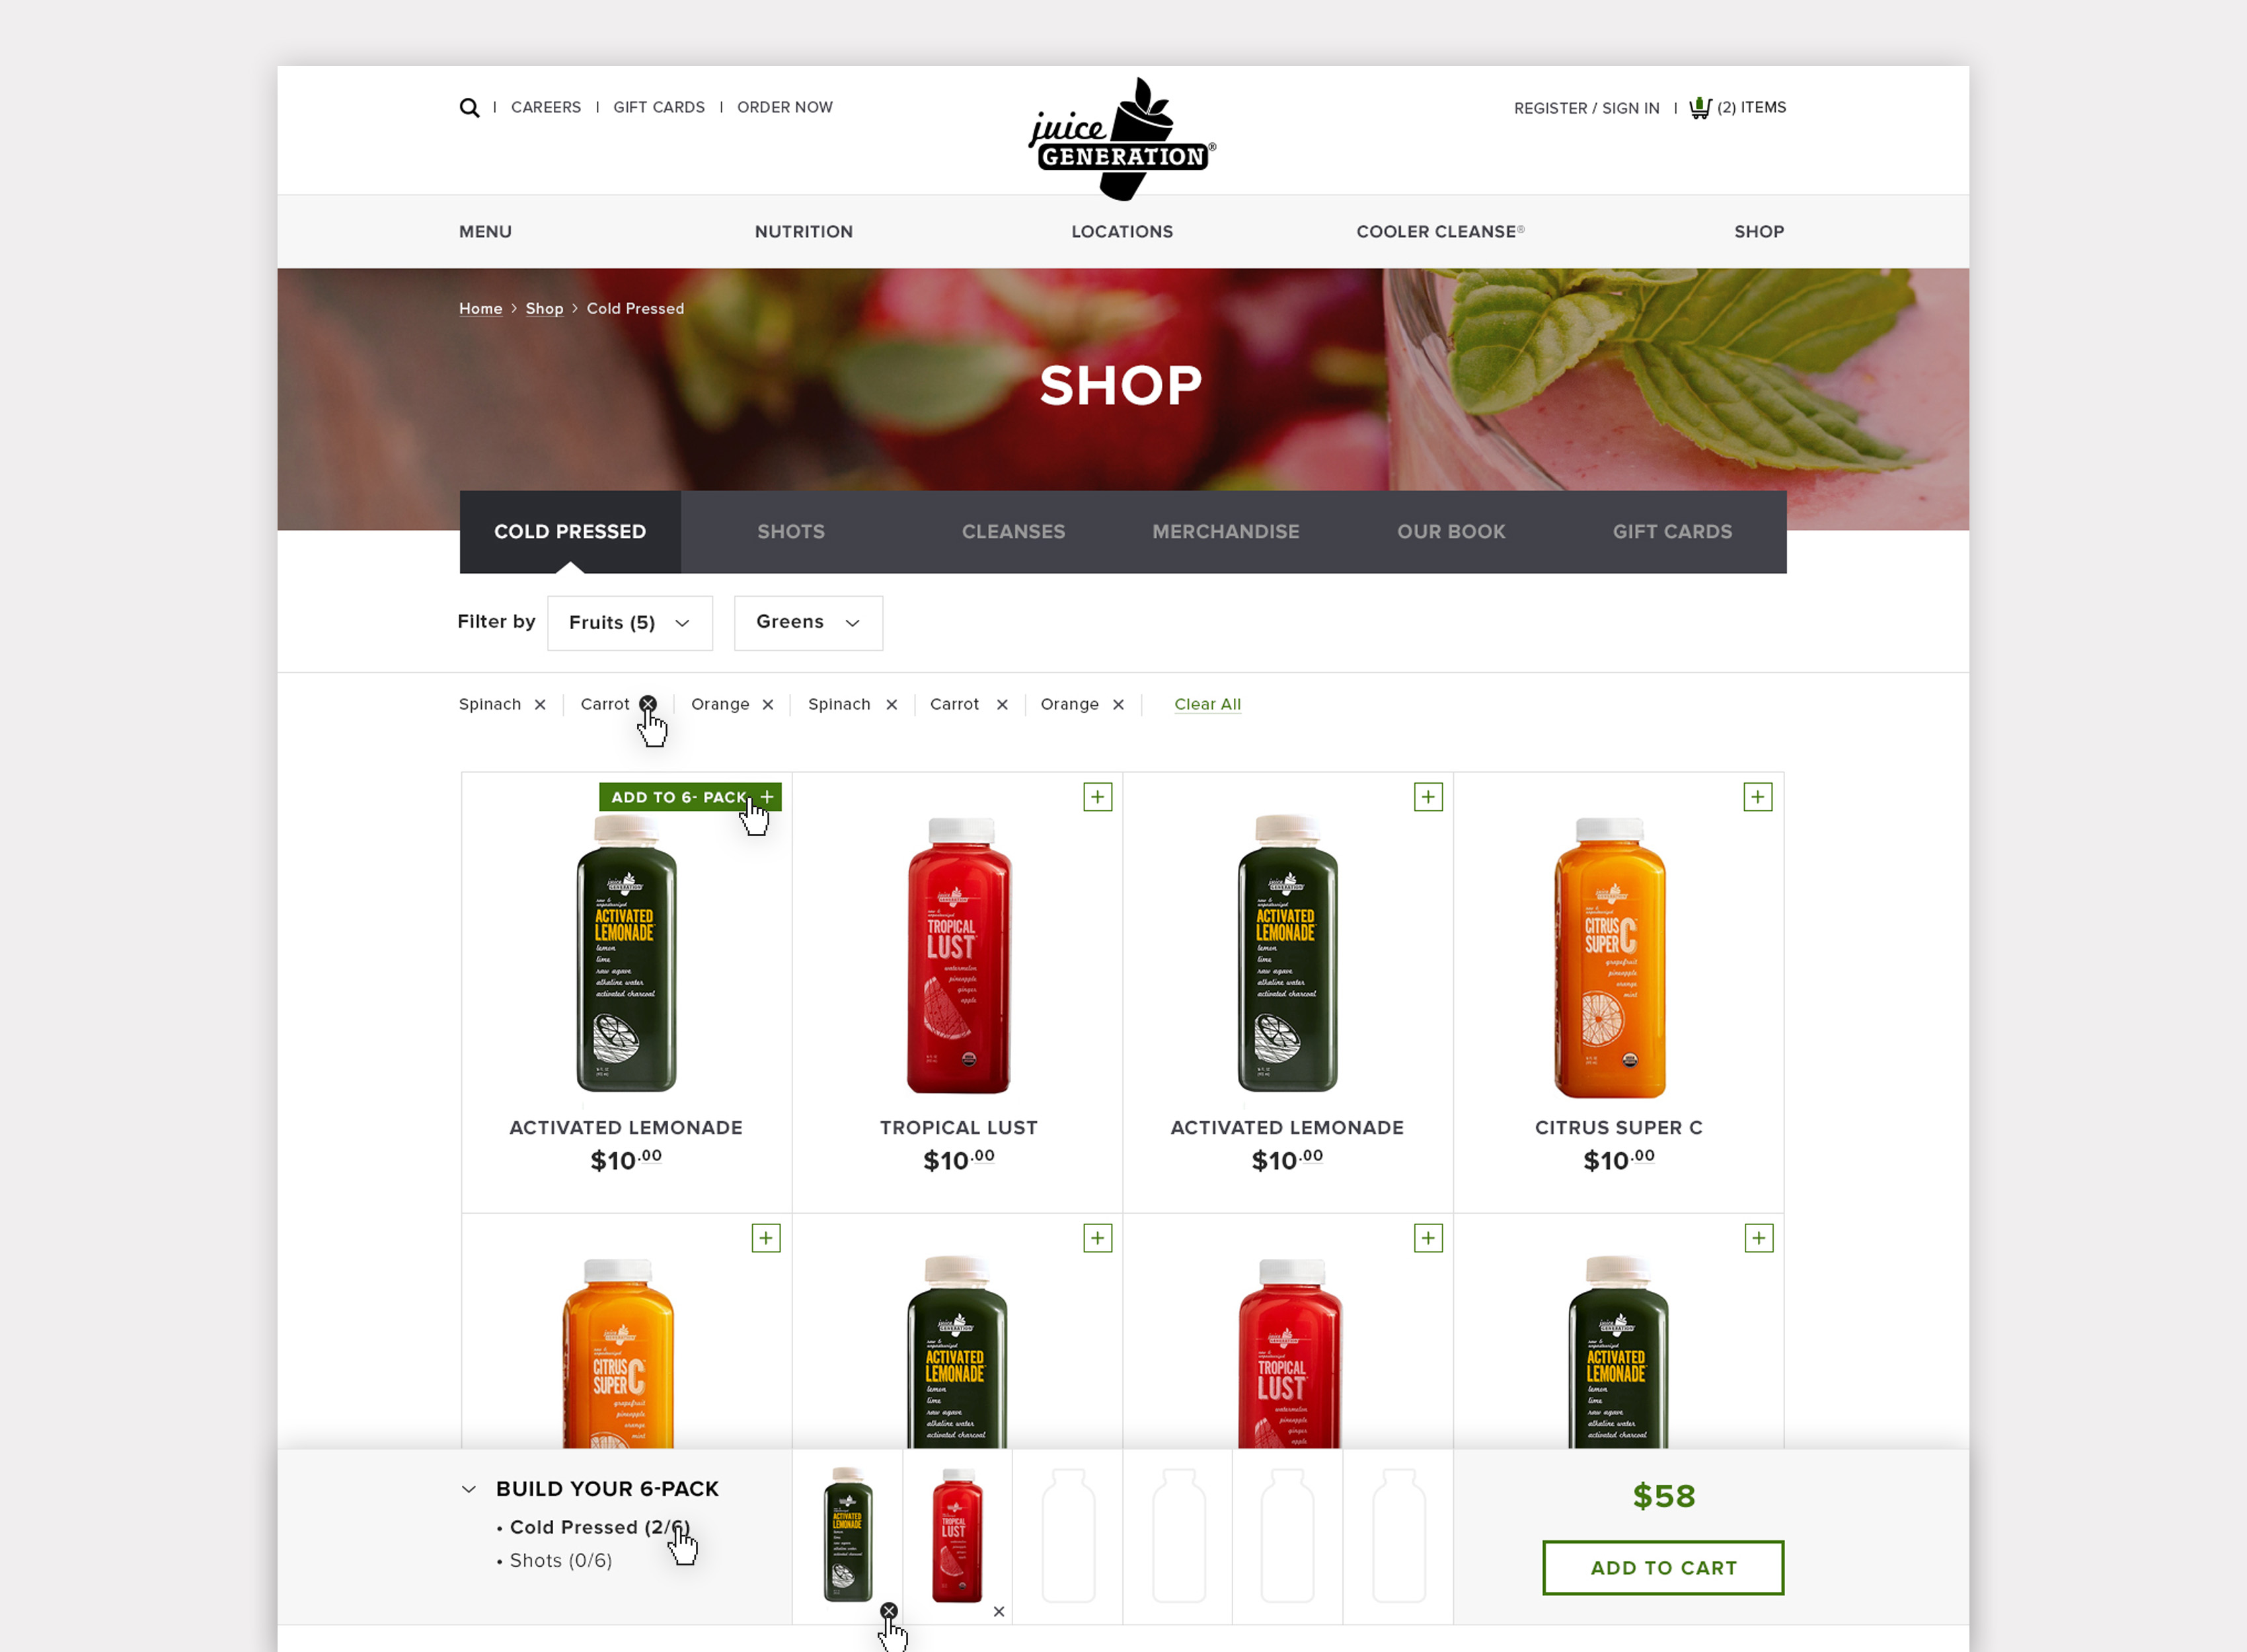 Product listing page with six pack drawer interface in bottom of page.